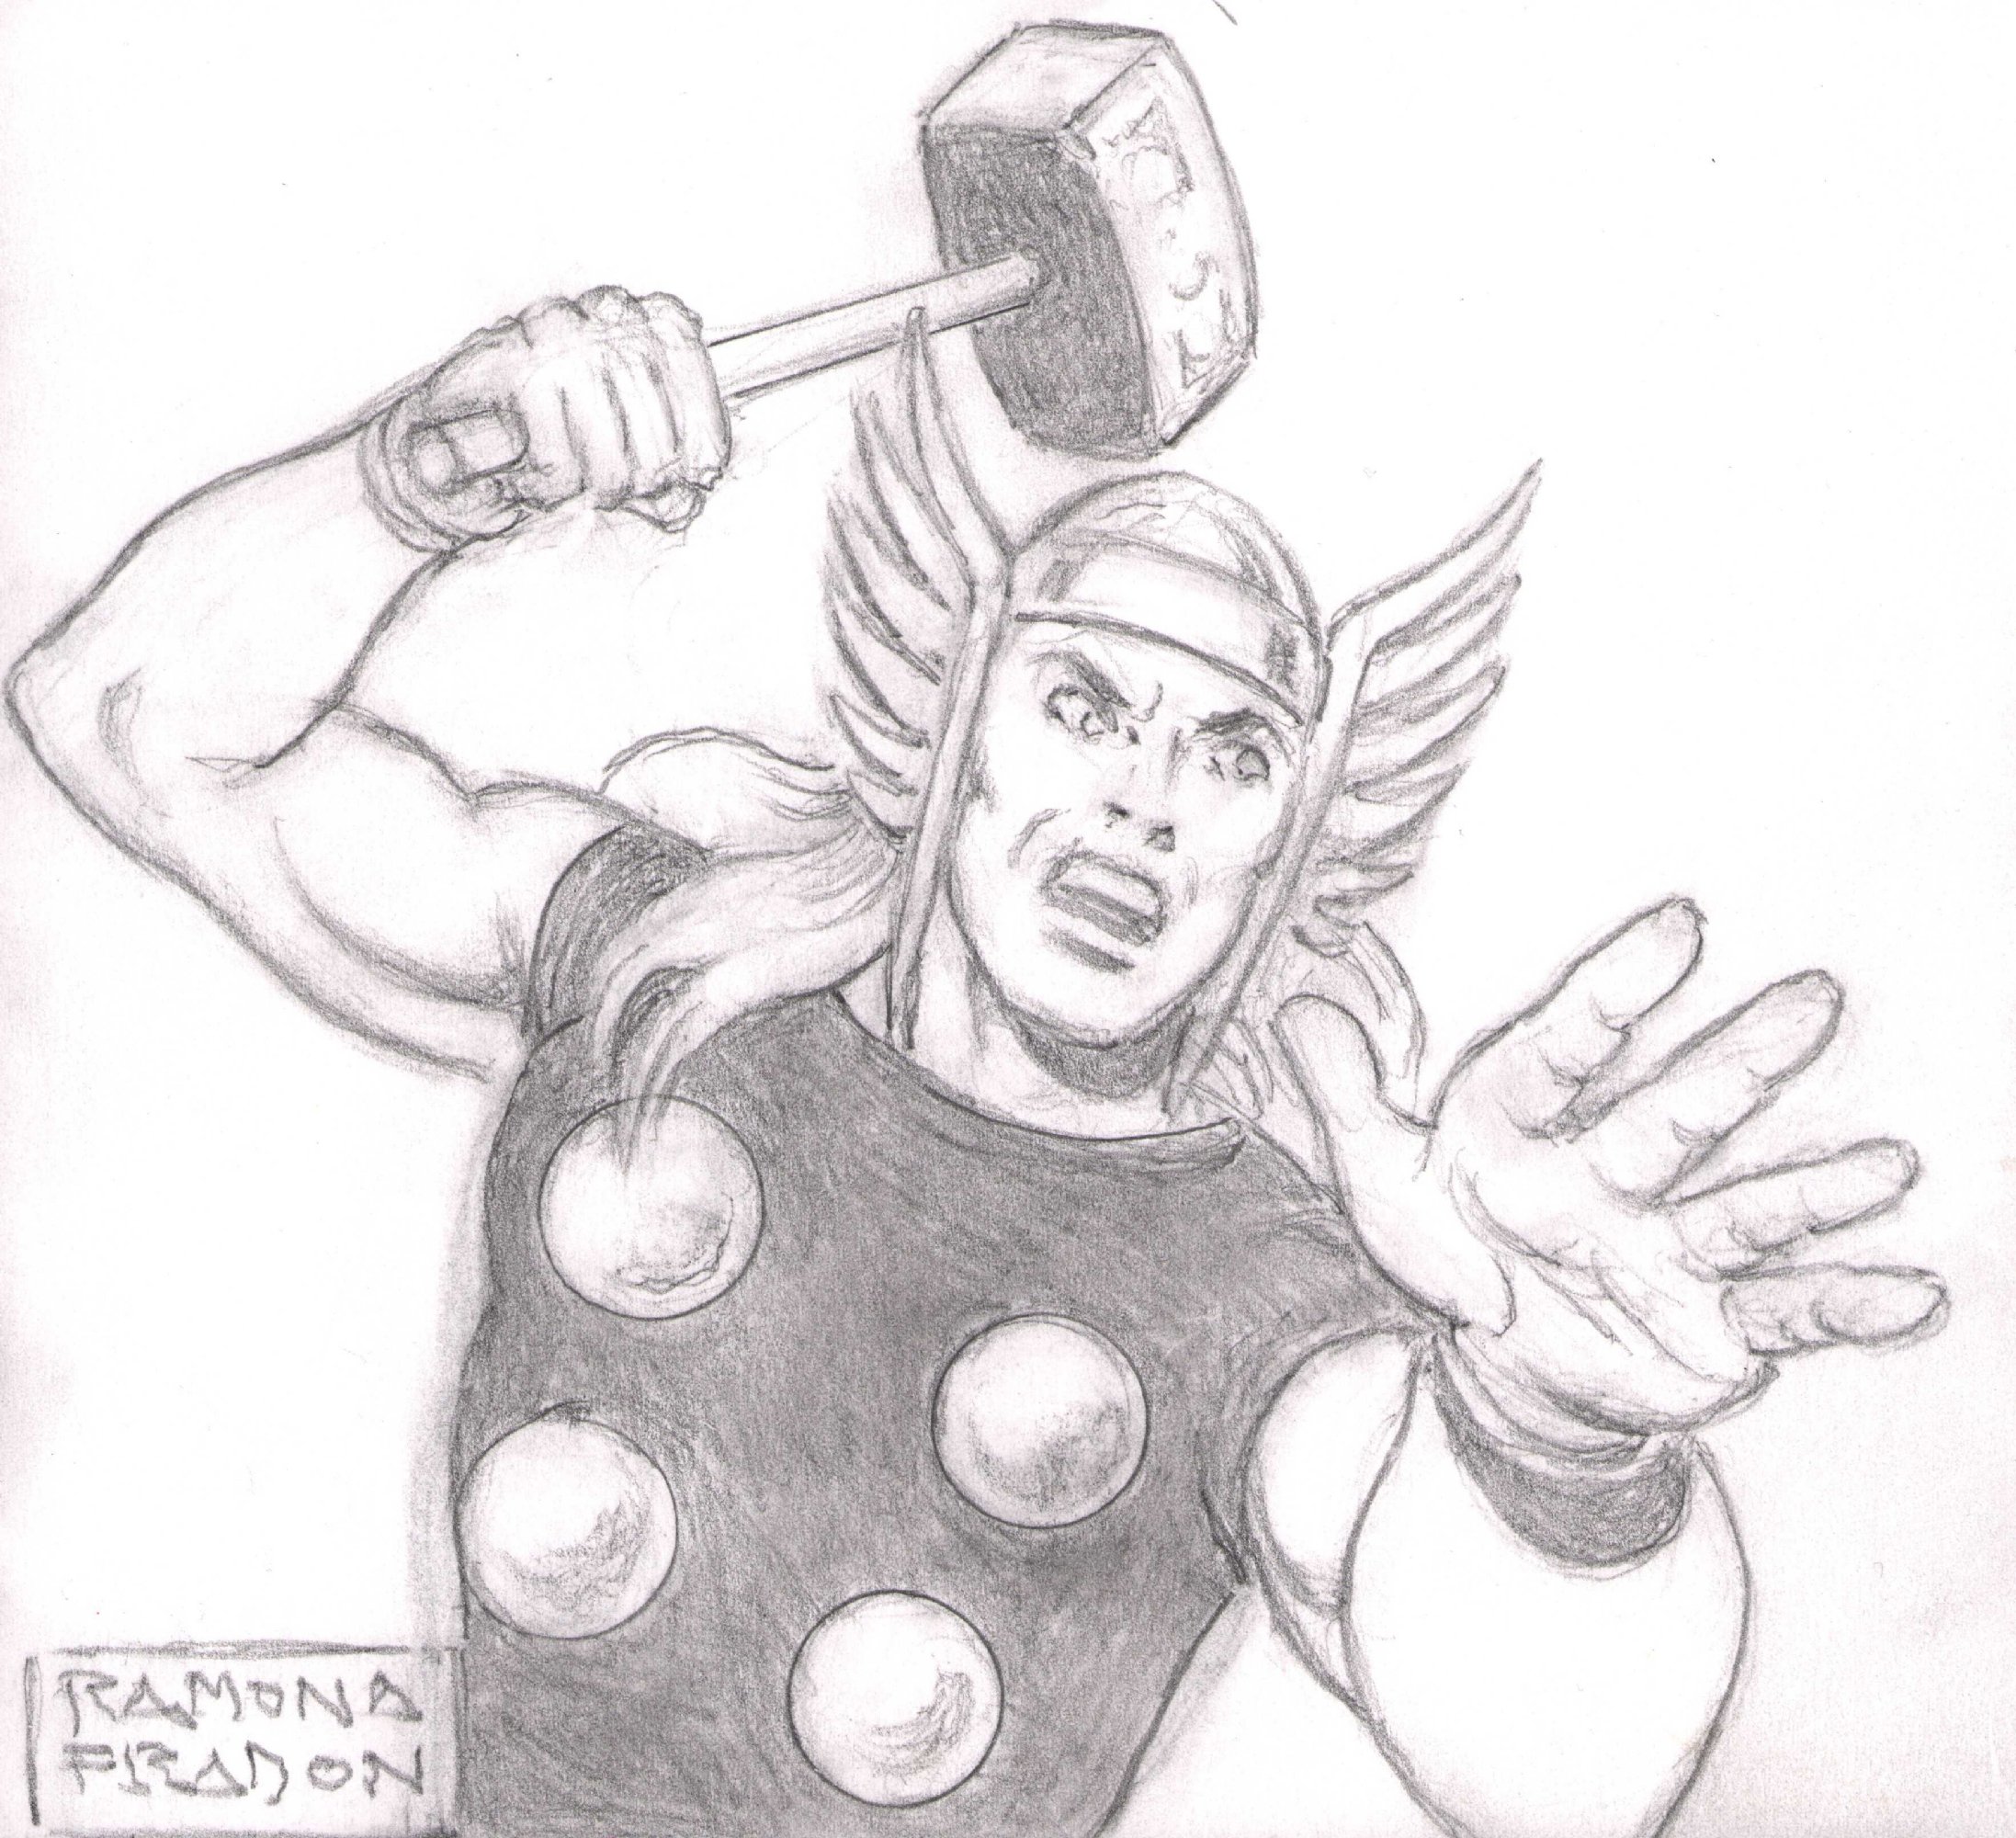 thor drawing sean | DOODLE LITRATEESTA